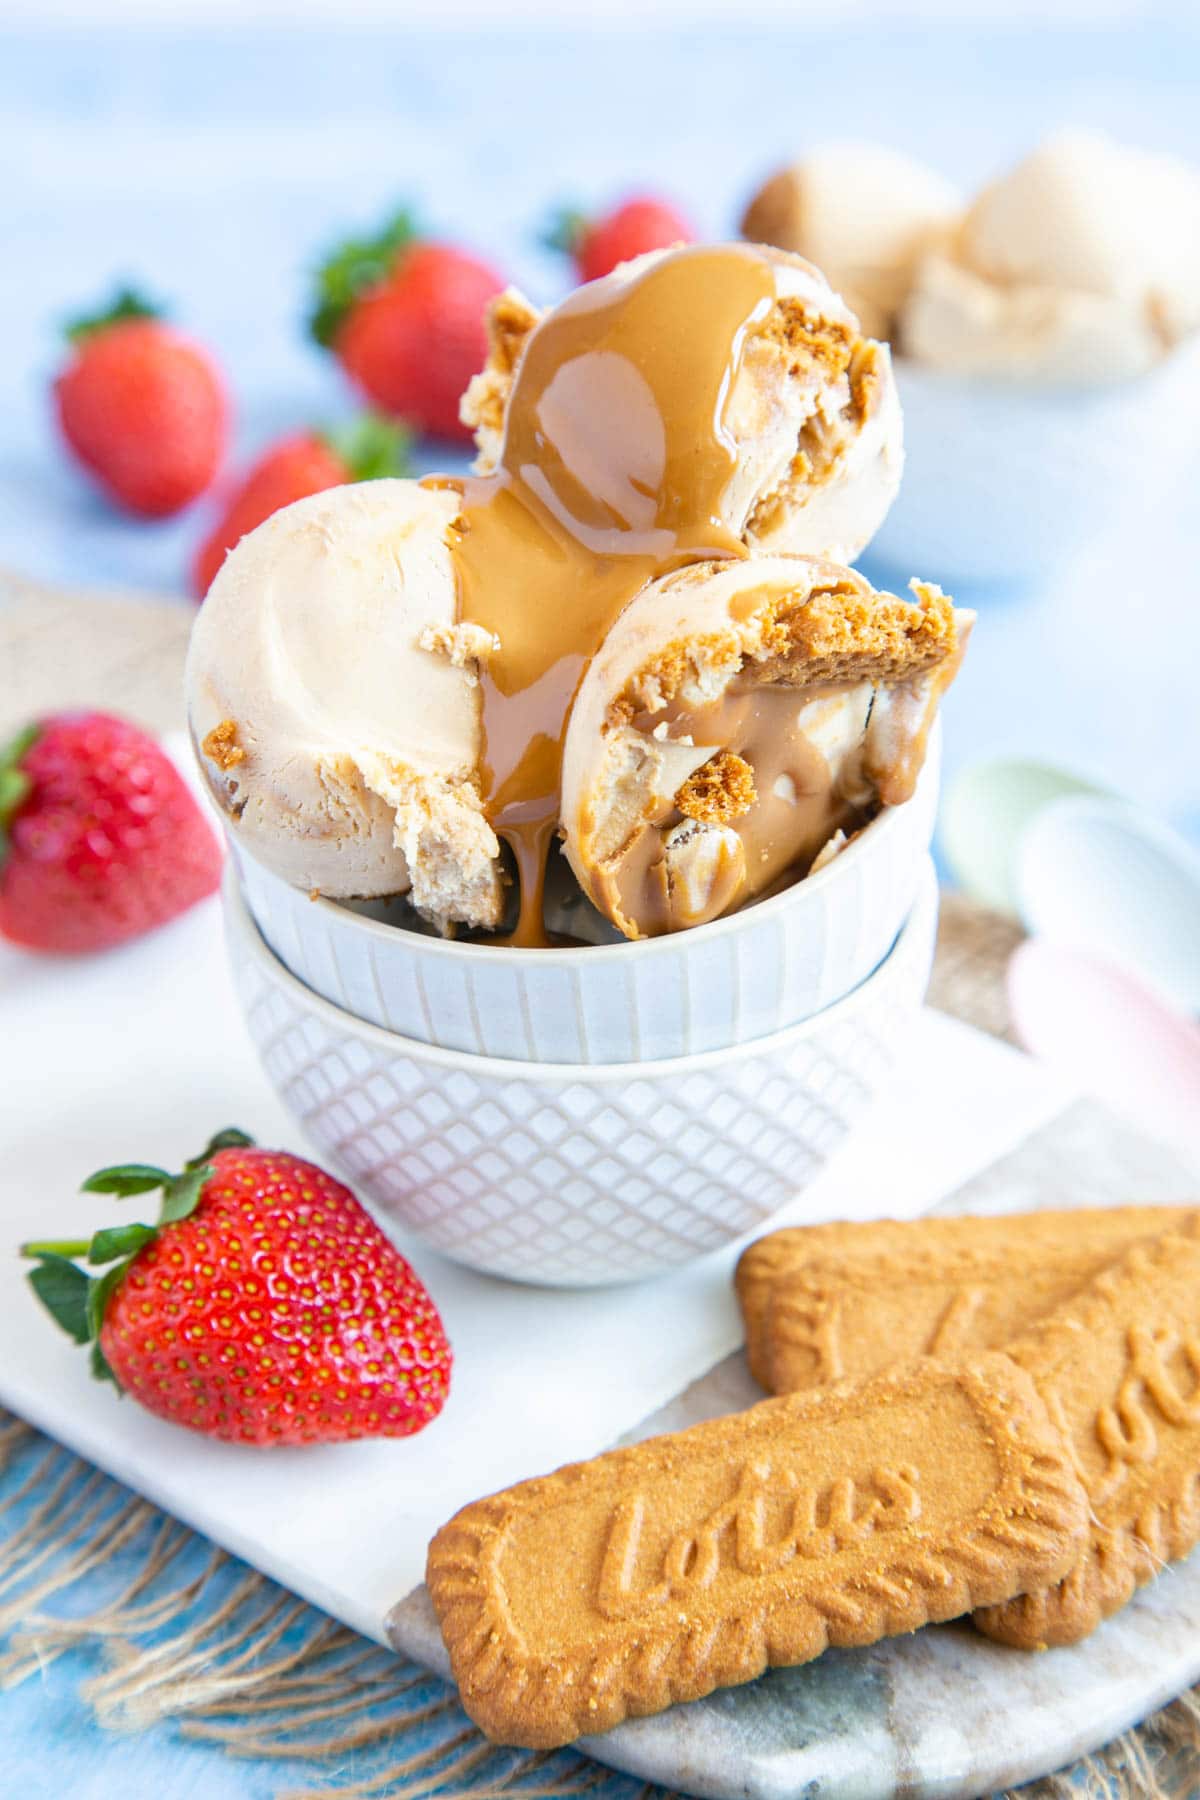 Three scoops of Biscoff ice cream in a stack of two bowls. In the foreground are some lotus speculoos biscuits and a strawberry. Melted speculoos has been poured onto the ice cream.